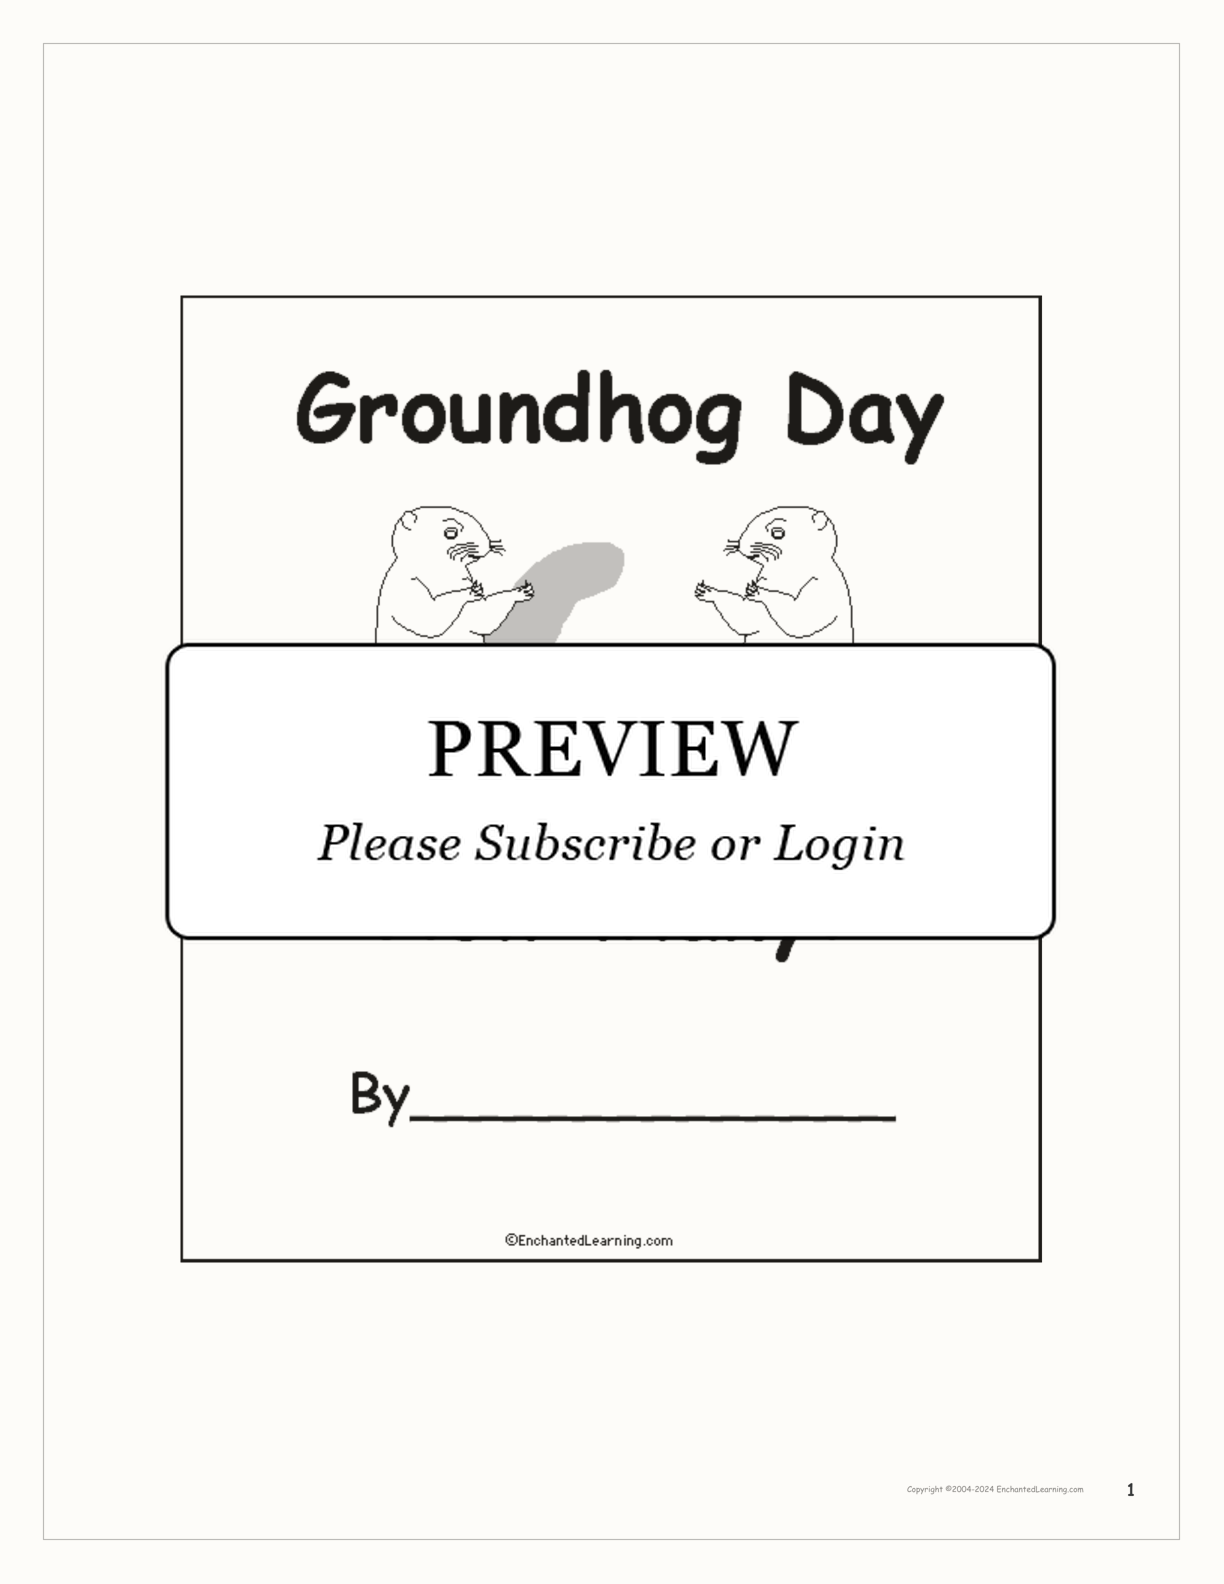 'Groundhog Day: How Many?' interactive worksheet page 1